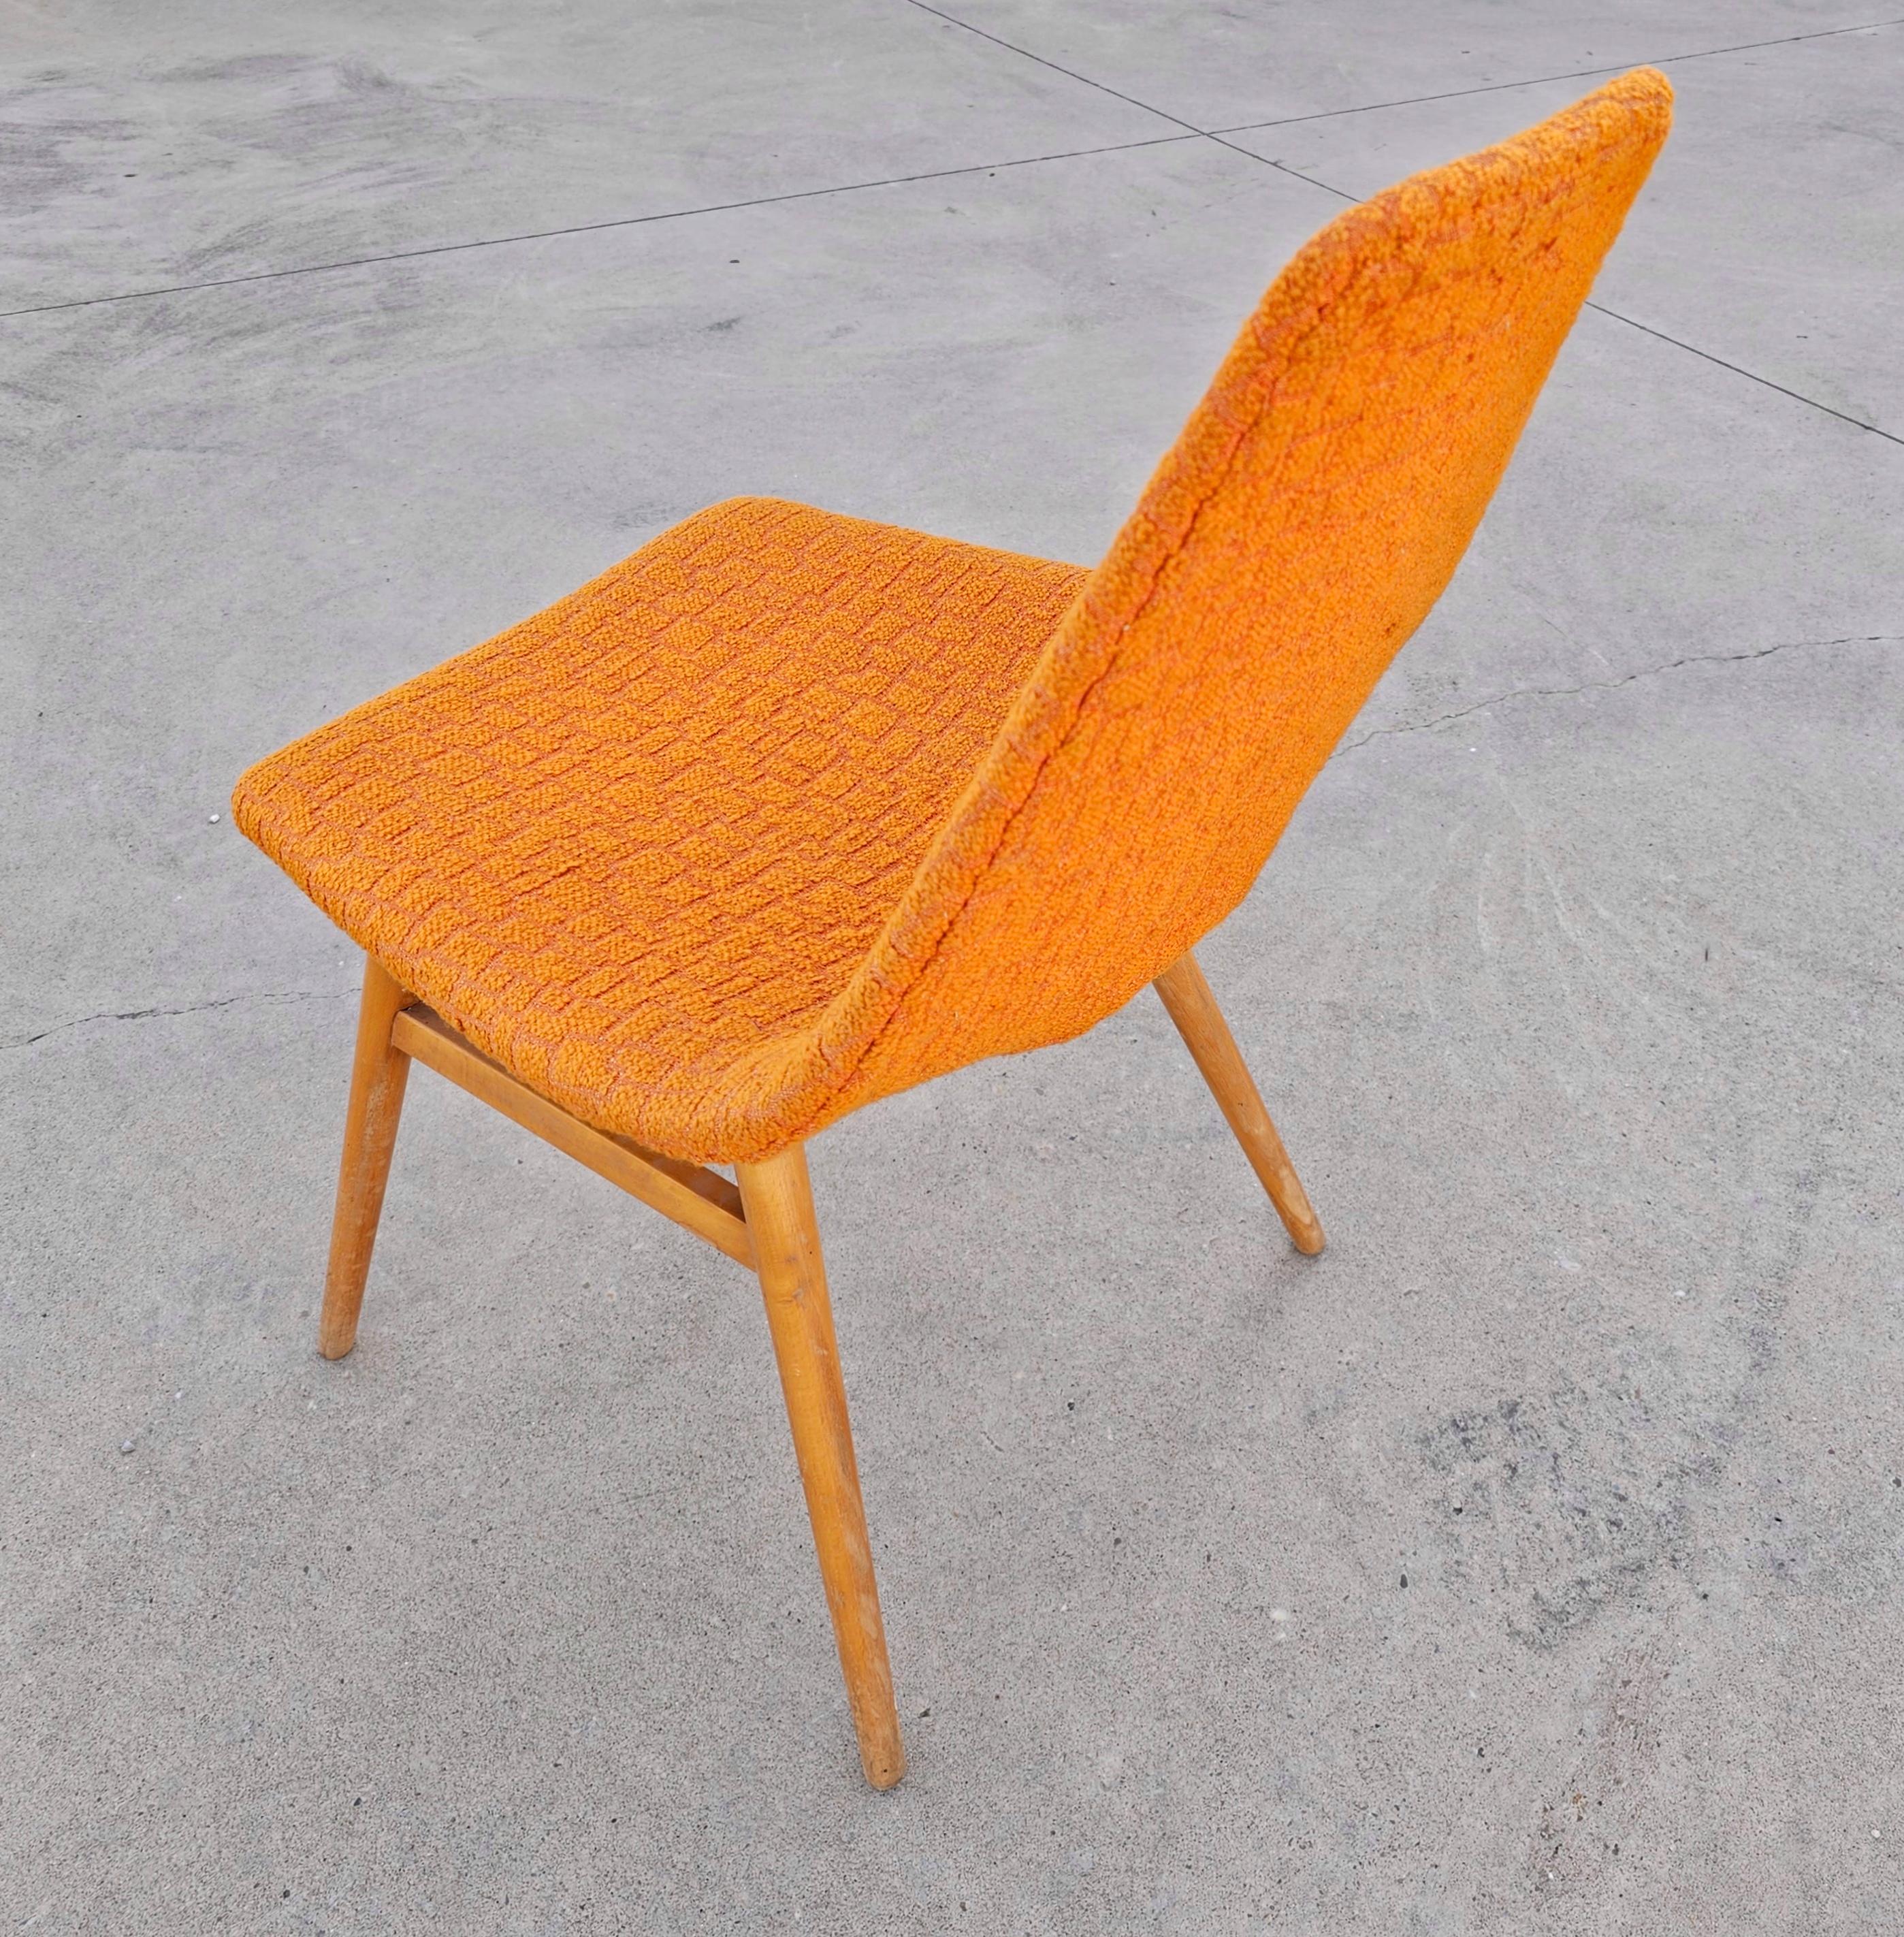 Pair of Mid-Century Modern Side Chairs by Judit Burian and Erika Szek, 1950s For Sale 4